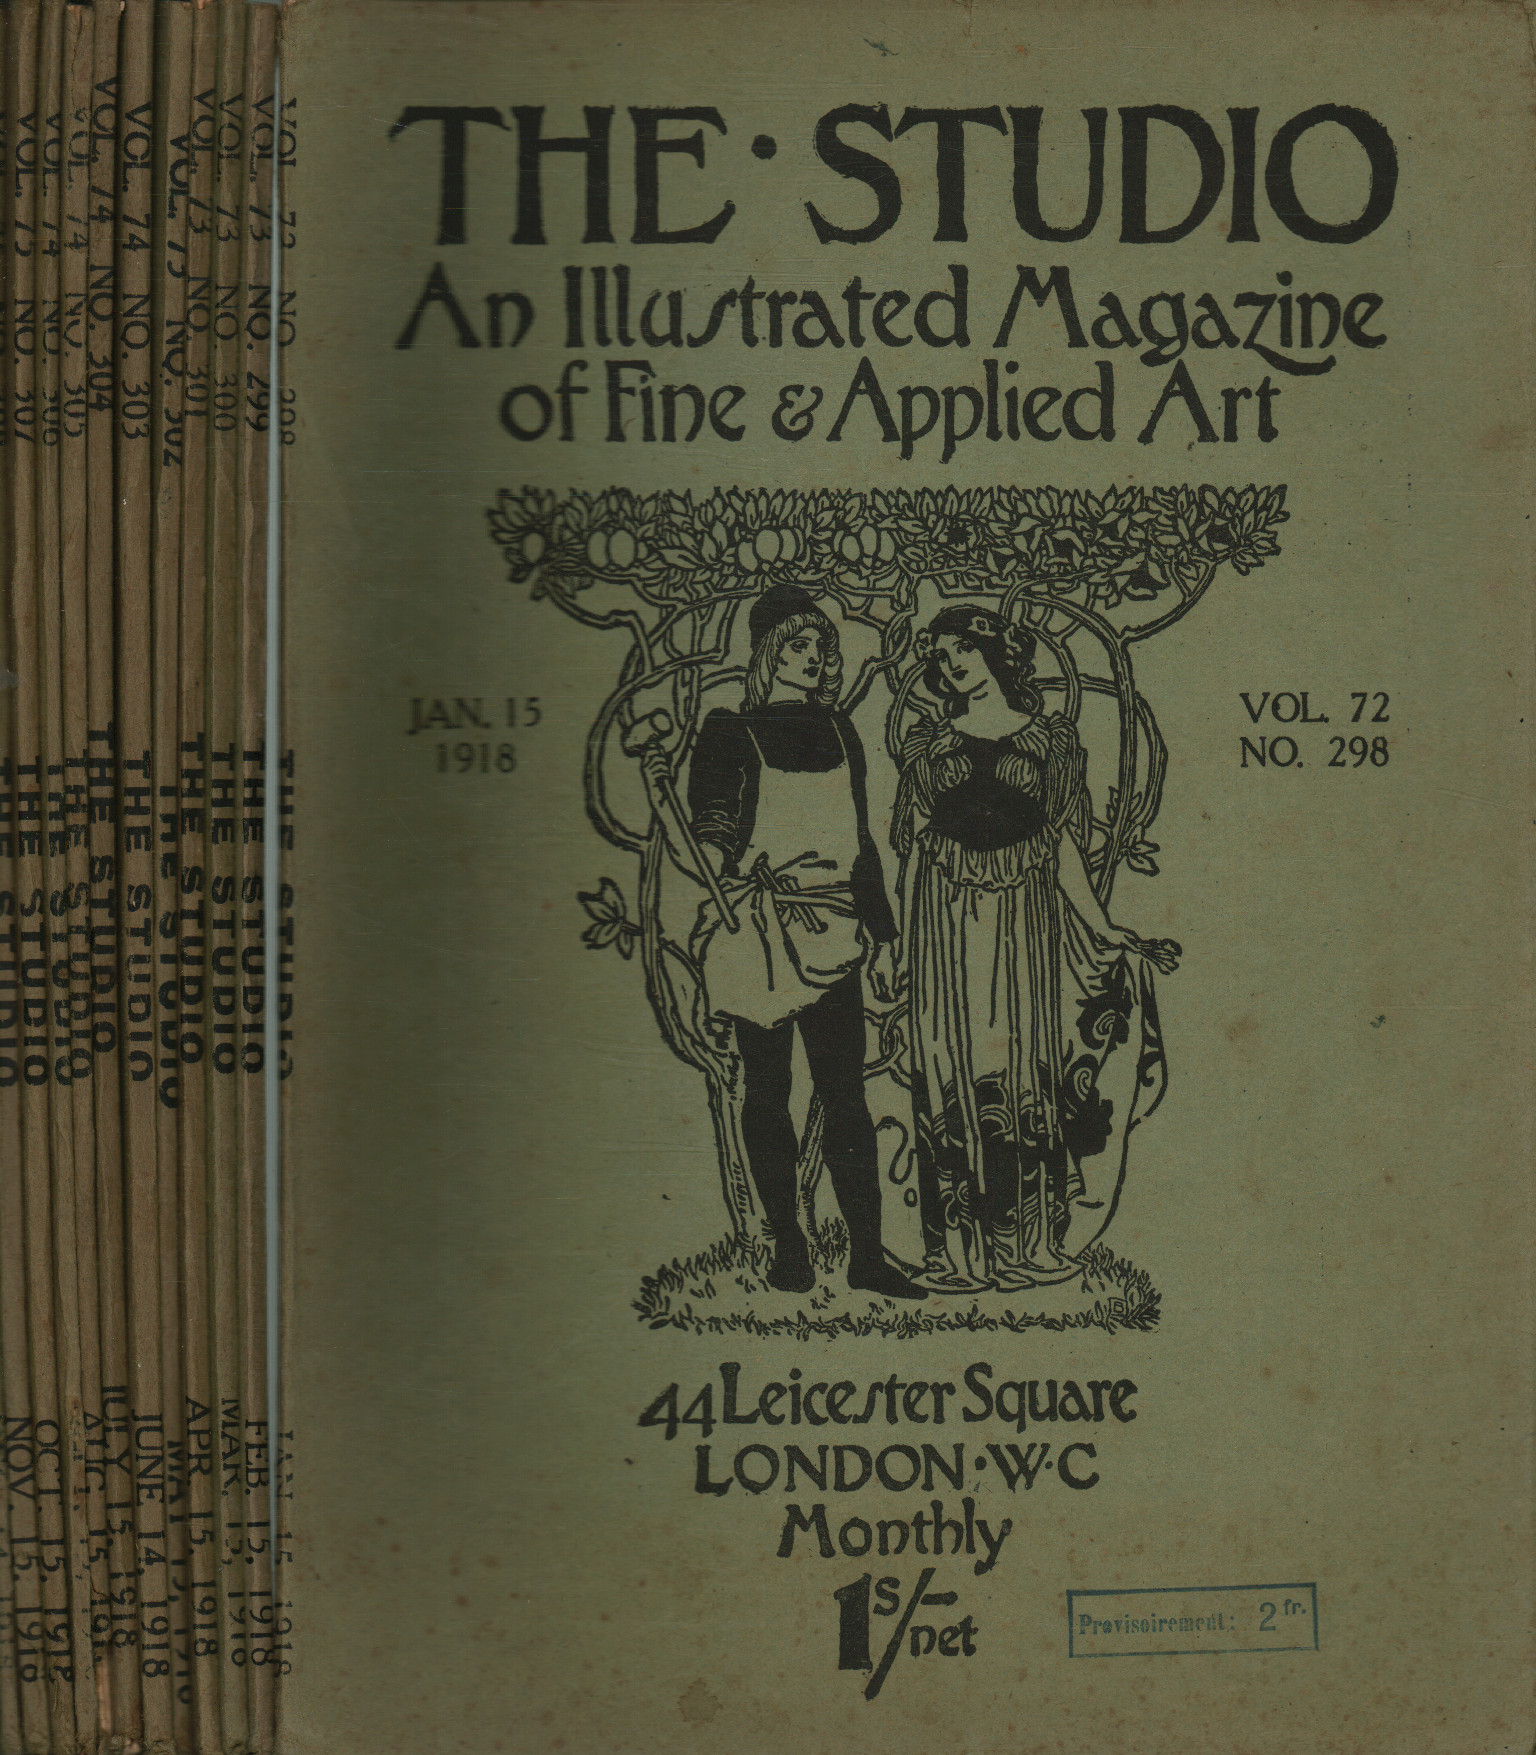 The Studio vintage 1918 (12 issues), The Studio vintage 1918 complete (12 issues ago